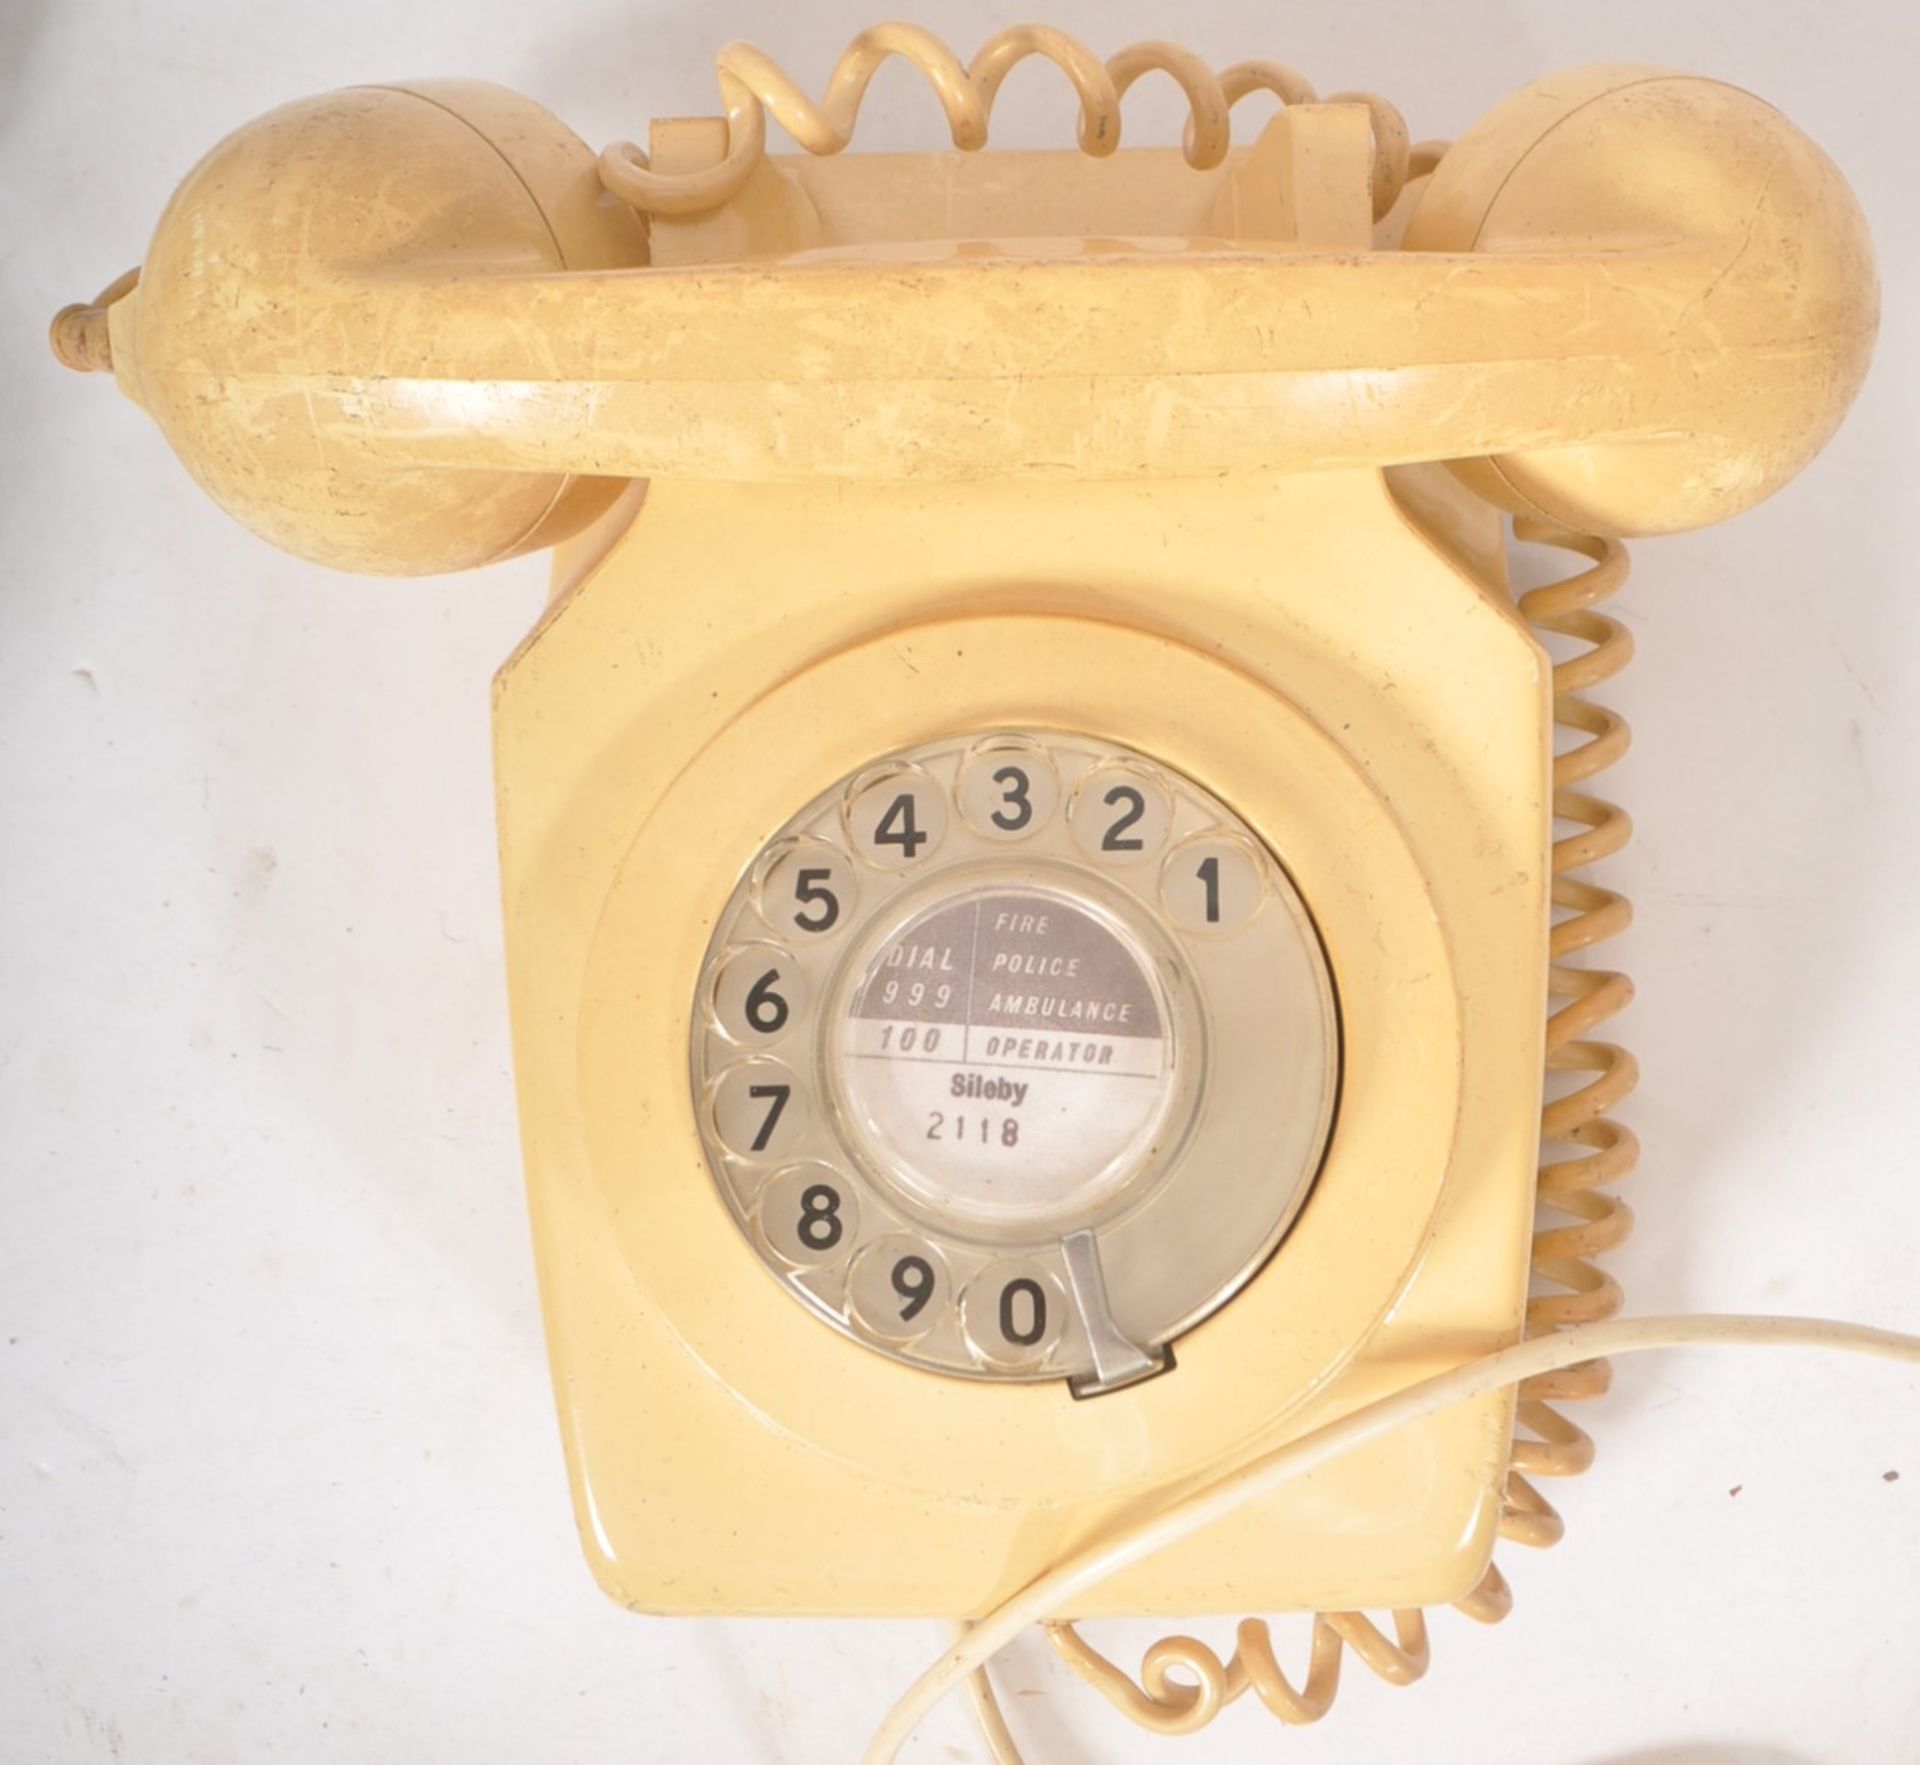 COLLECTION OF EIGHT VINTAGE 1970S ROTARY DIAL GPO TELEPHONES - Image 2 of 6